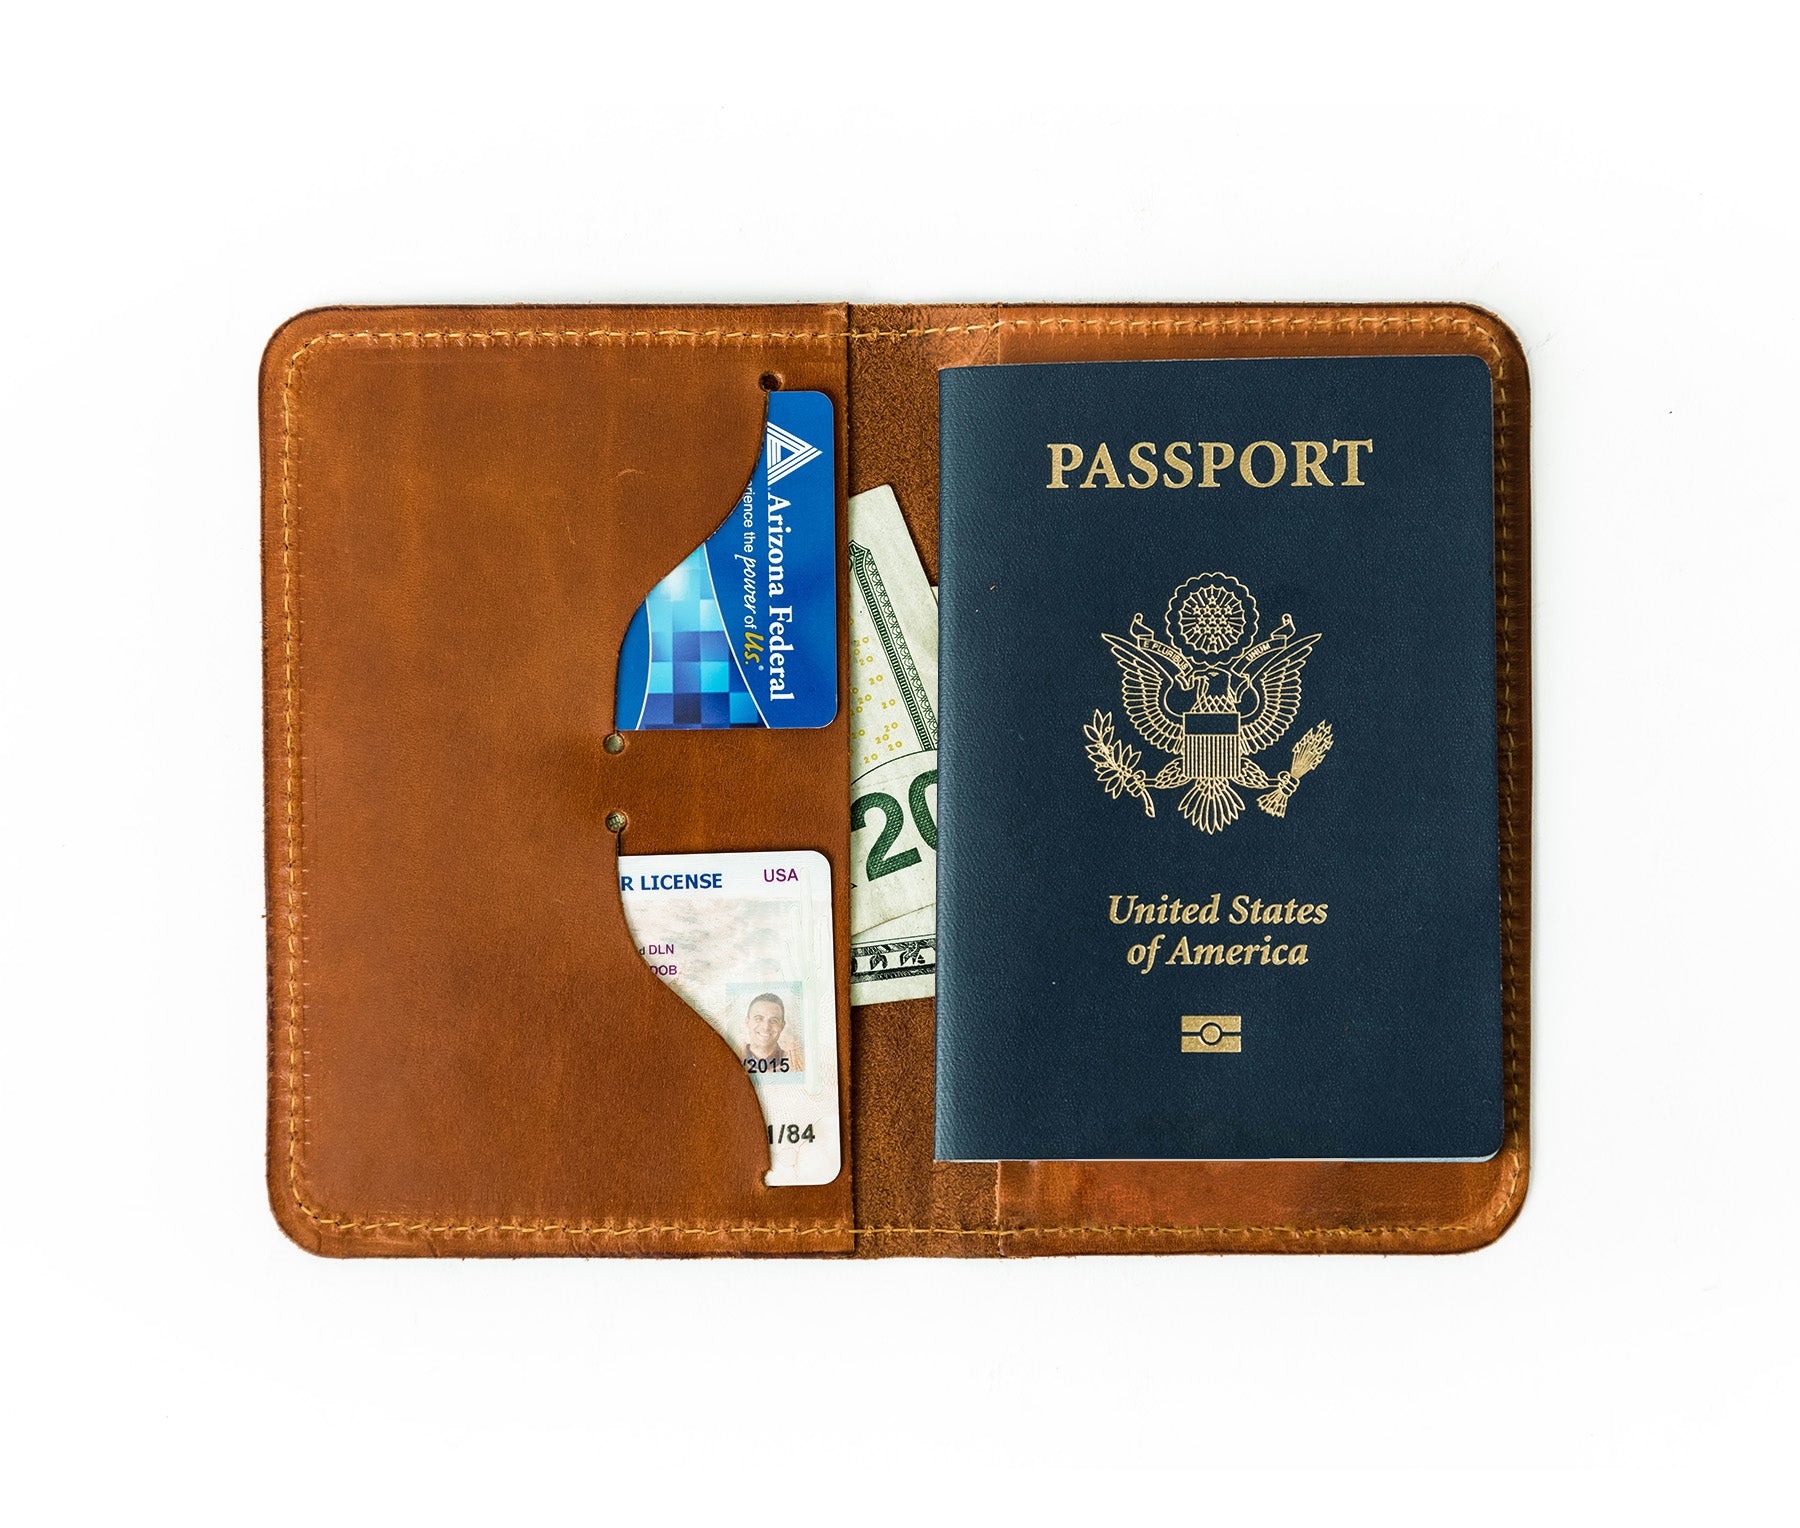 Leather Passport Cover - A Gentleman's Trove